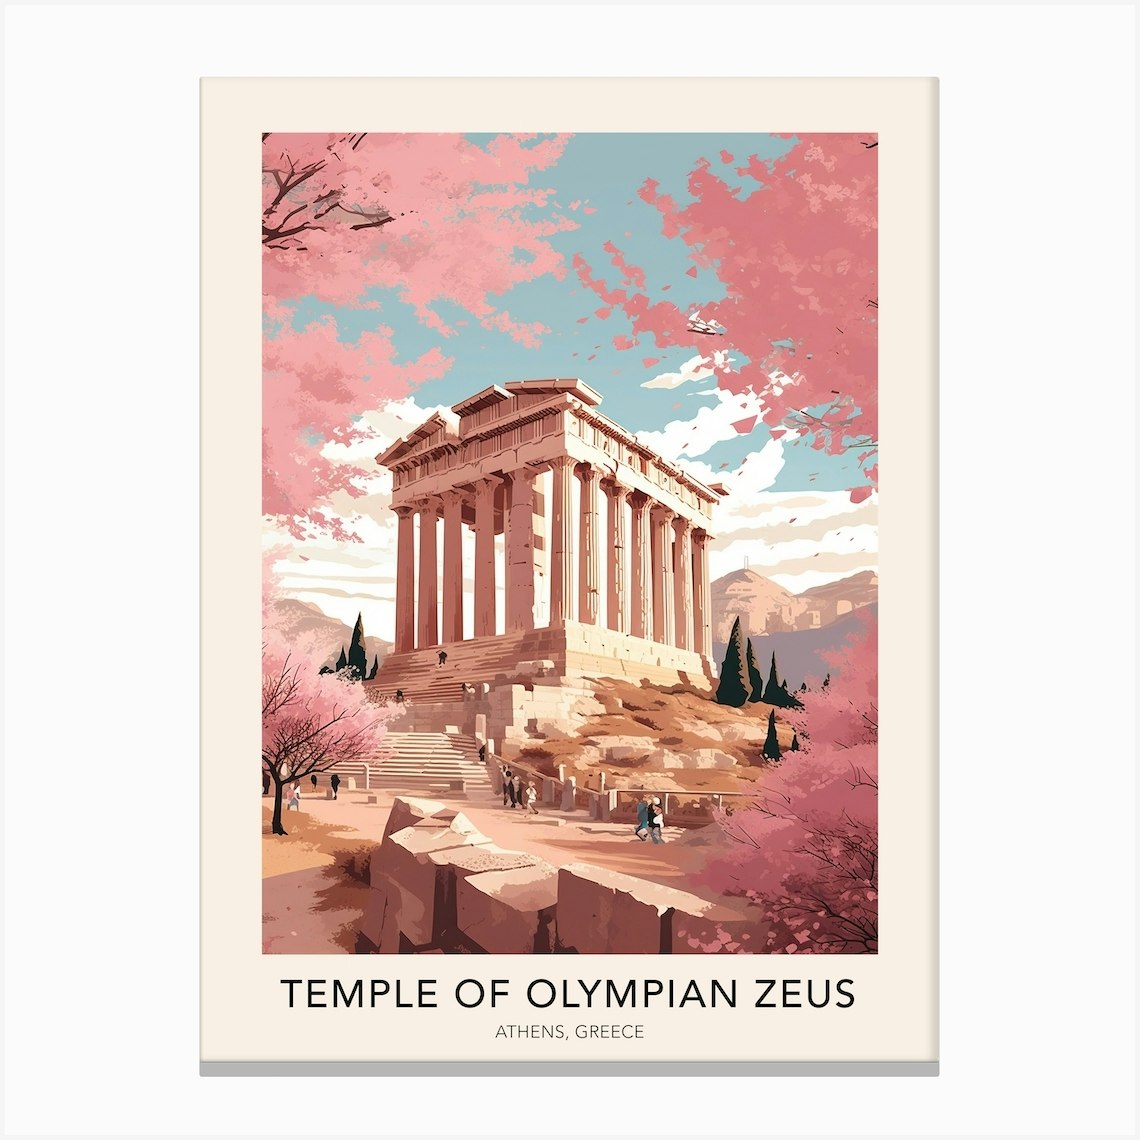 Art Travel The Temple Canvas Athens Fy Adventure Poster Print The of Of Olympian Zeus by Greece -